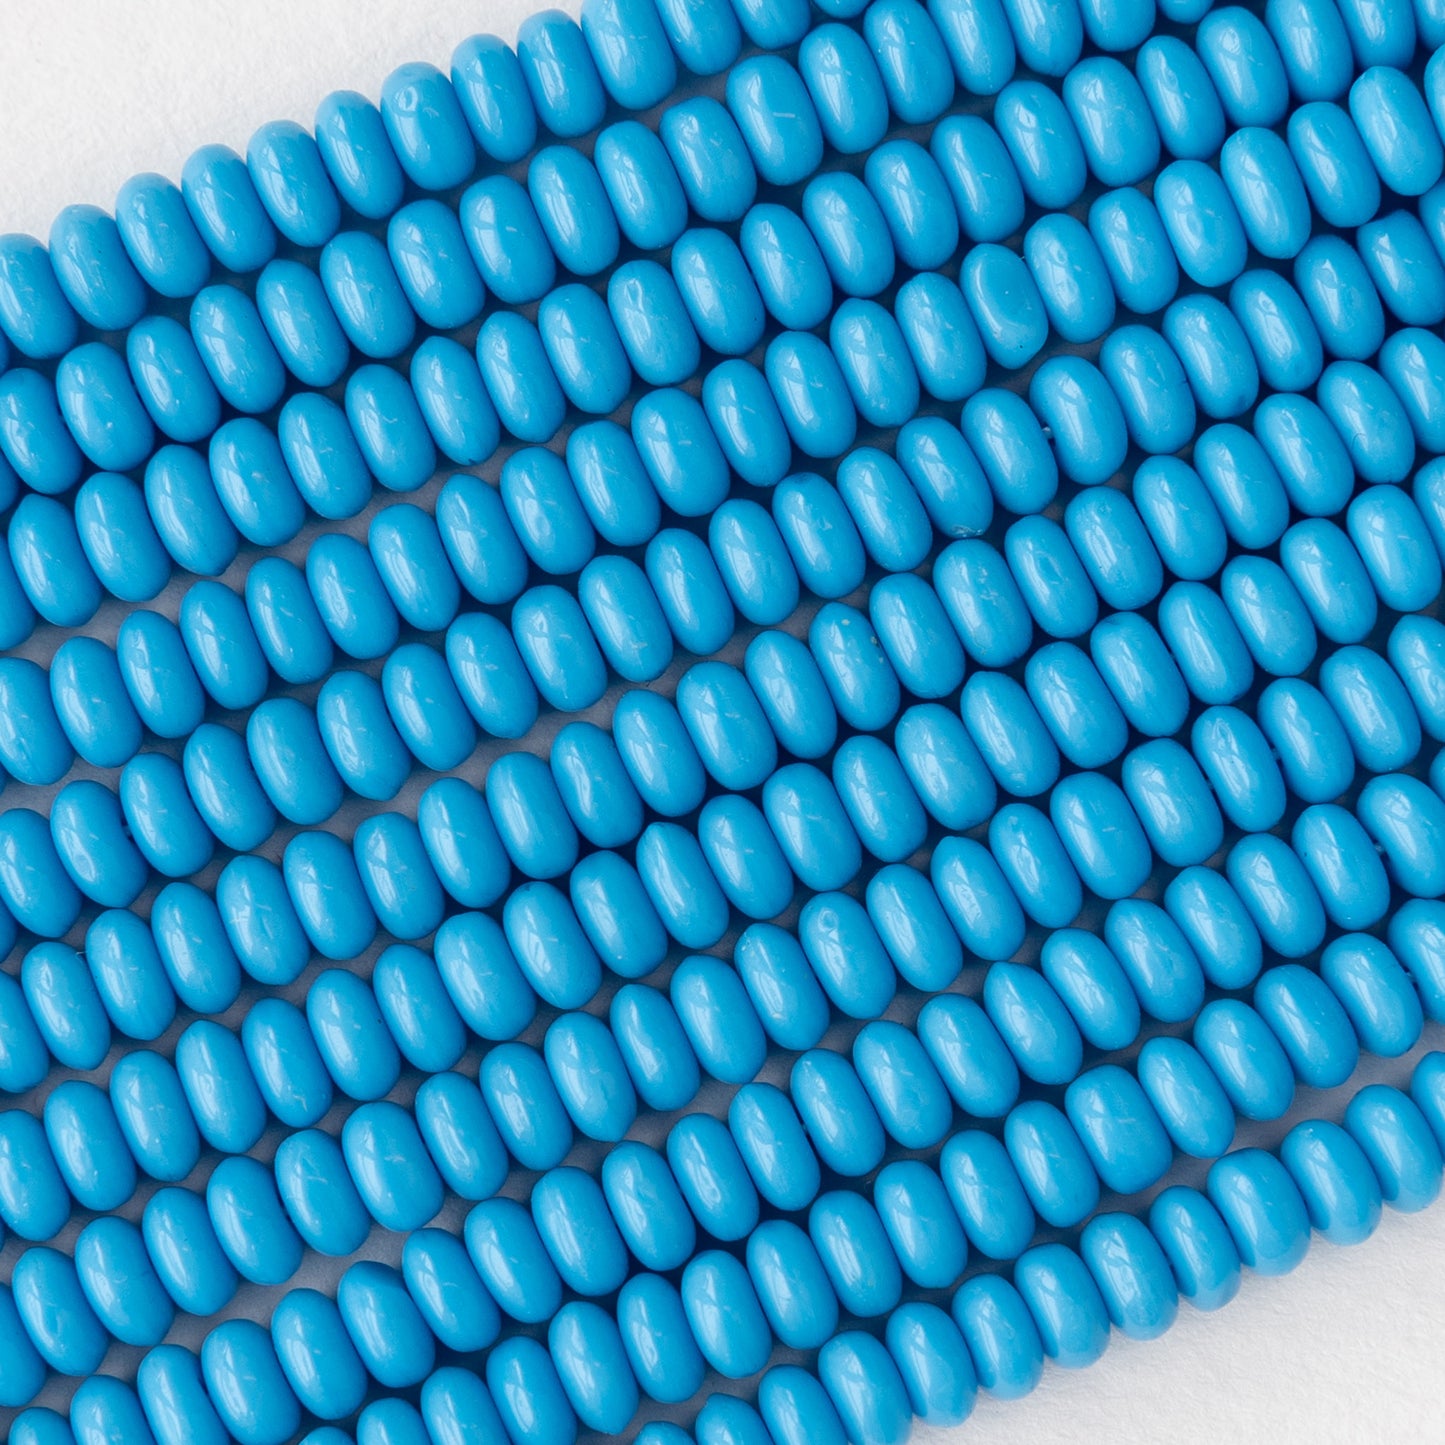 4mm Rondelle Beads - Blue Turquoise - 100 Beads